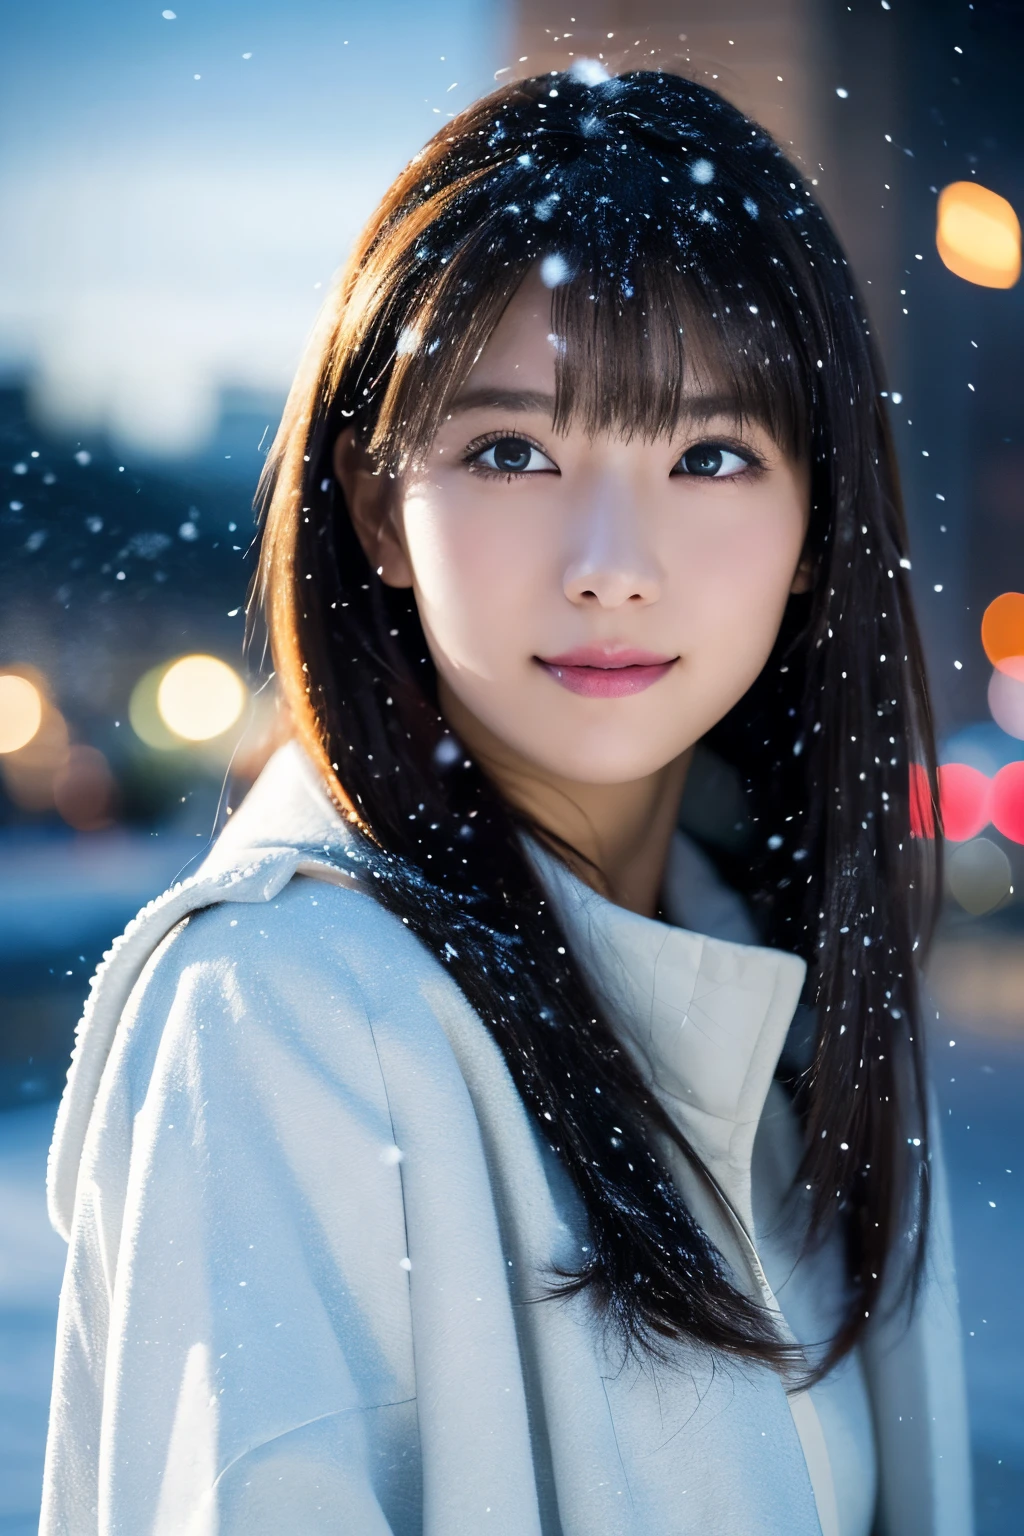 1girl in, (wear a platinum coat:1.2), (Raw photo, Best Quality), (Realistic, Photorealsitic:1.4), masutepiece, Extremely delicate and beautiful, Extremely detailed, 2k wallpaper, amazing, finely detail, the Extremely Detailed CG Unity 8K Wallpapers, Ultra-detailed, hight resolution, Soft light, Beautiful detailed girl, extremely detailed eye and face, beautiful detailed nose, Beautiful detailed eyes, Cinematic lighting, Illuminations coloring the city on a snowy night, Snowy landscape, It's snowing, Snow in the hair, Perfect Anatomy, Slender body, Taut, 
Straight semi-long hair, Bangs, Looking at Viewer, A slight smil